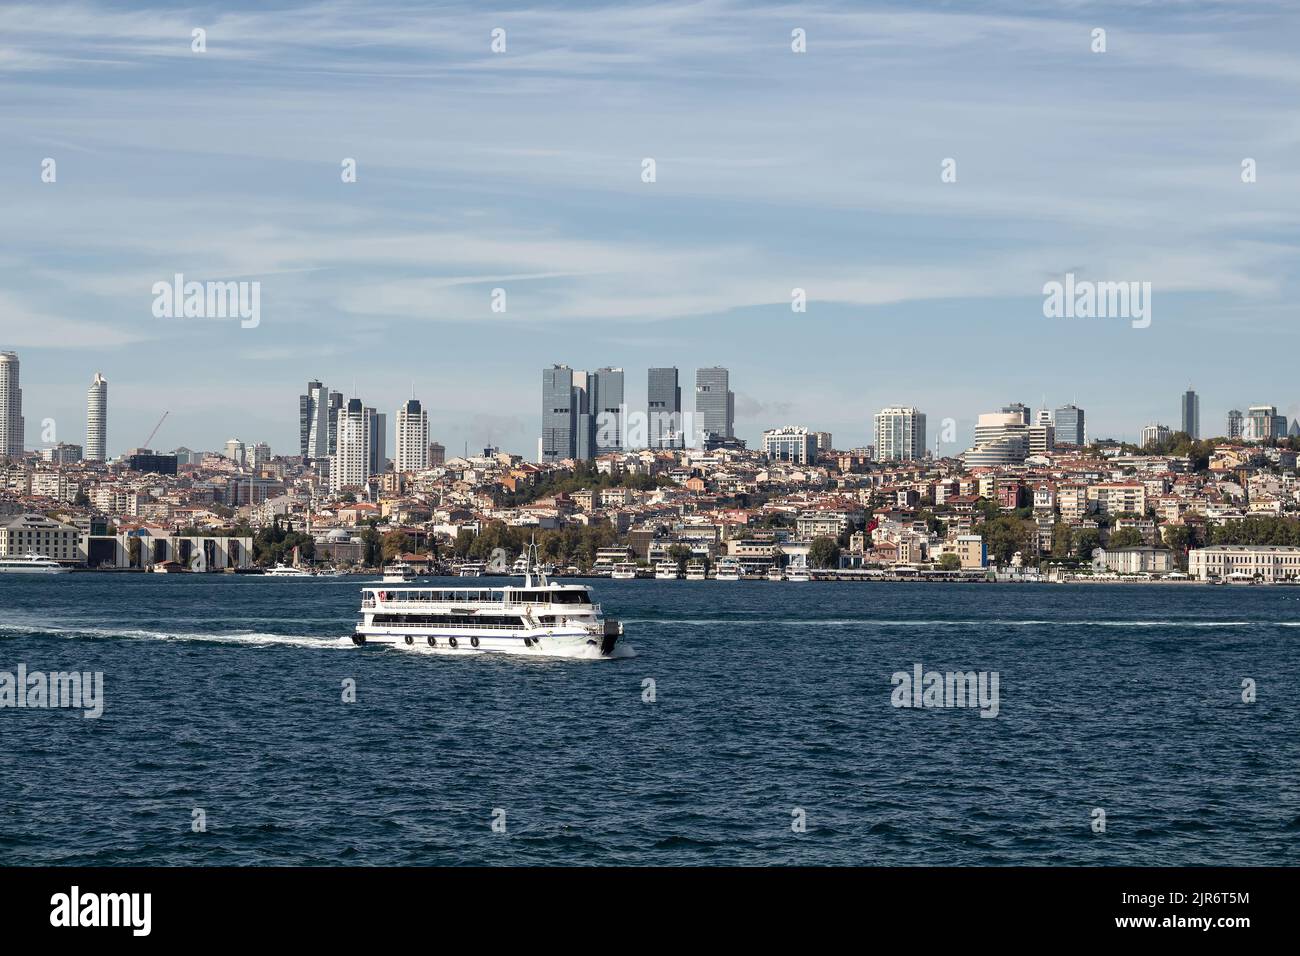 View of a cruise tour boat on Bosphorus and European side of Istanbul. It is a sunny summer day. Stock Photo